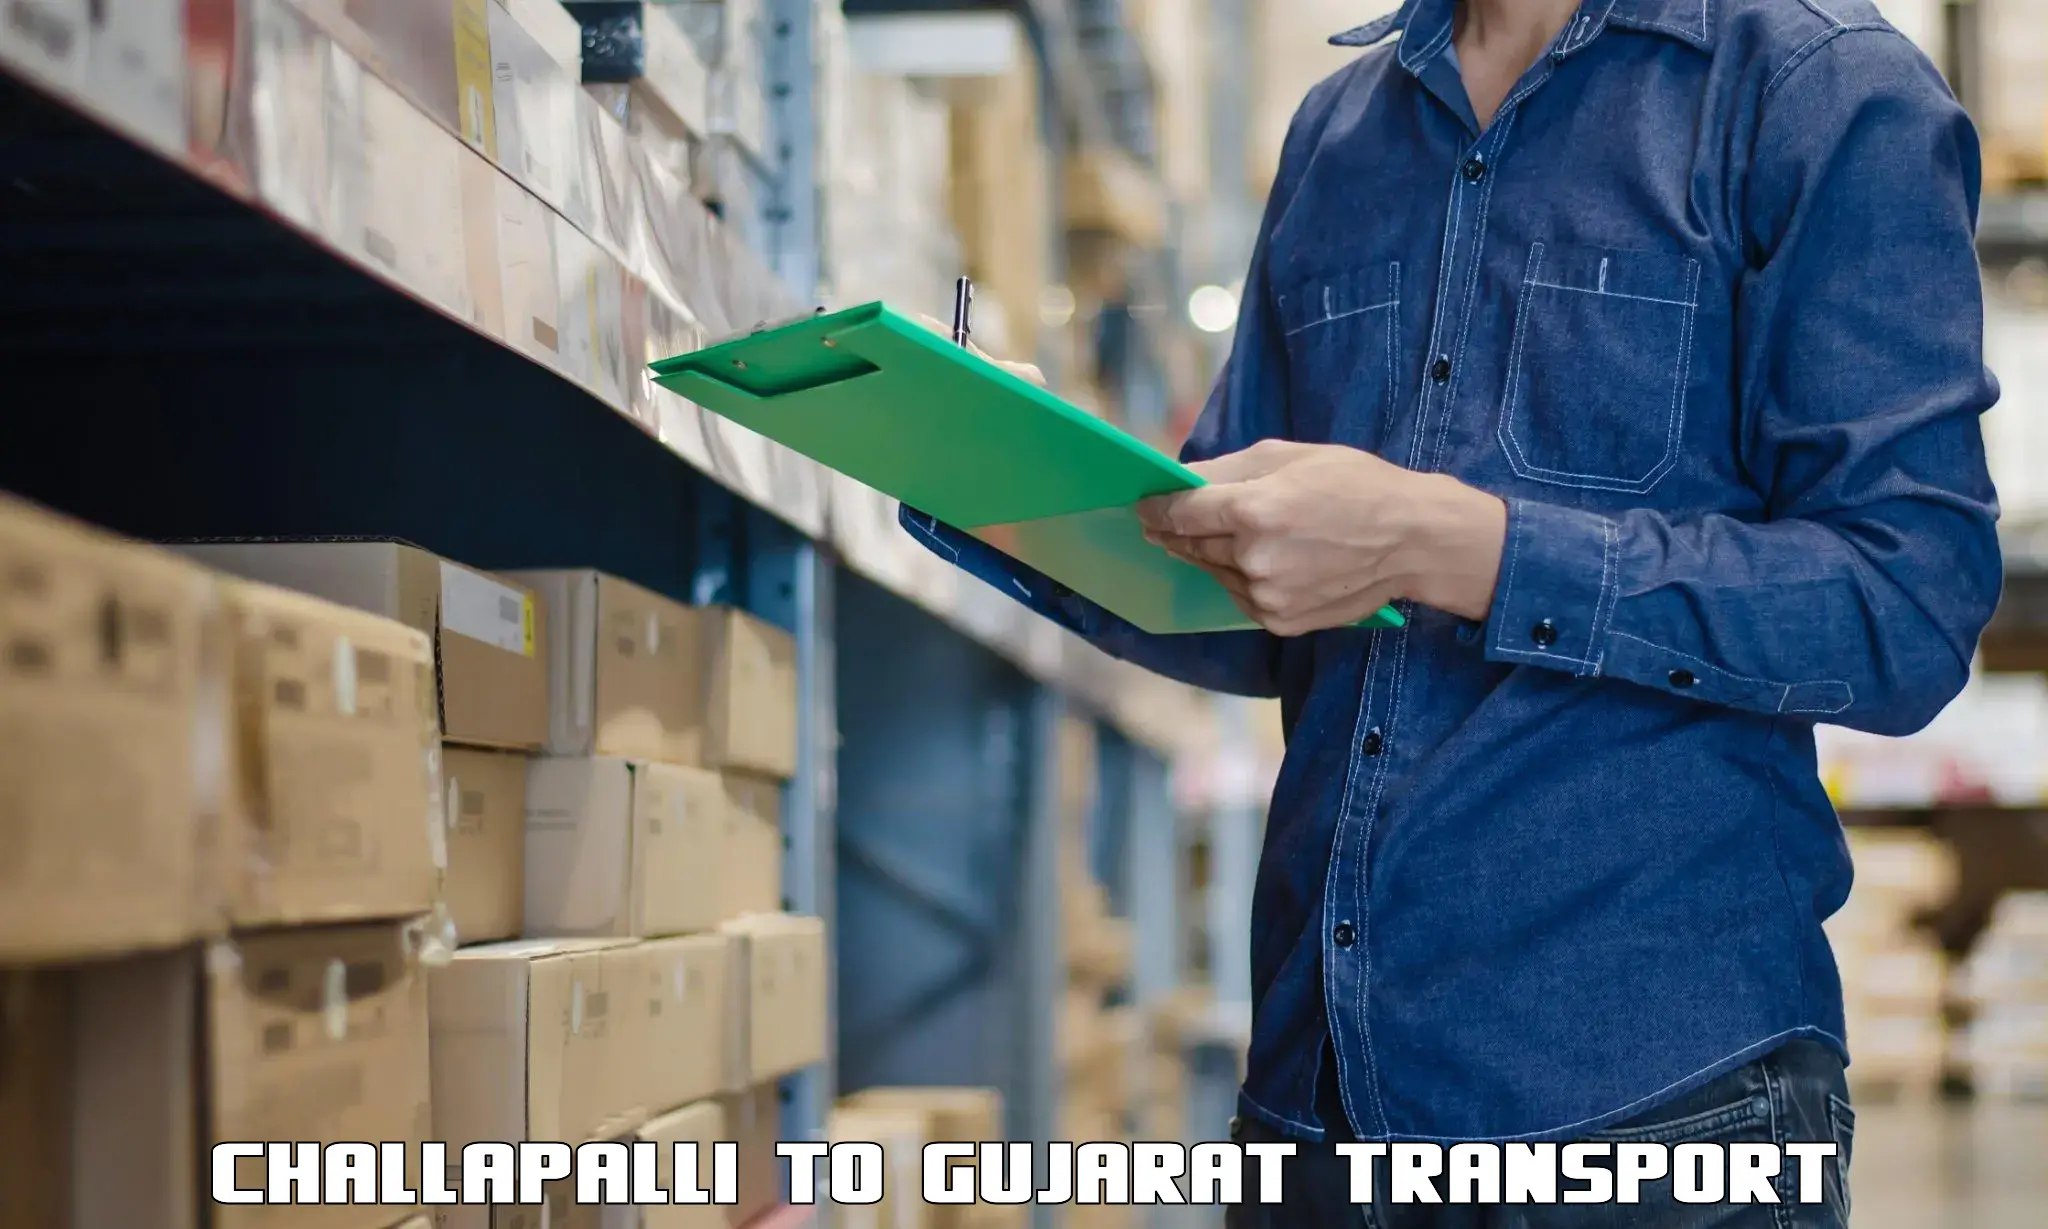 Container transport service Challapalli to GIDC